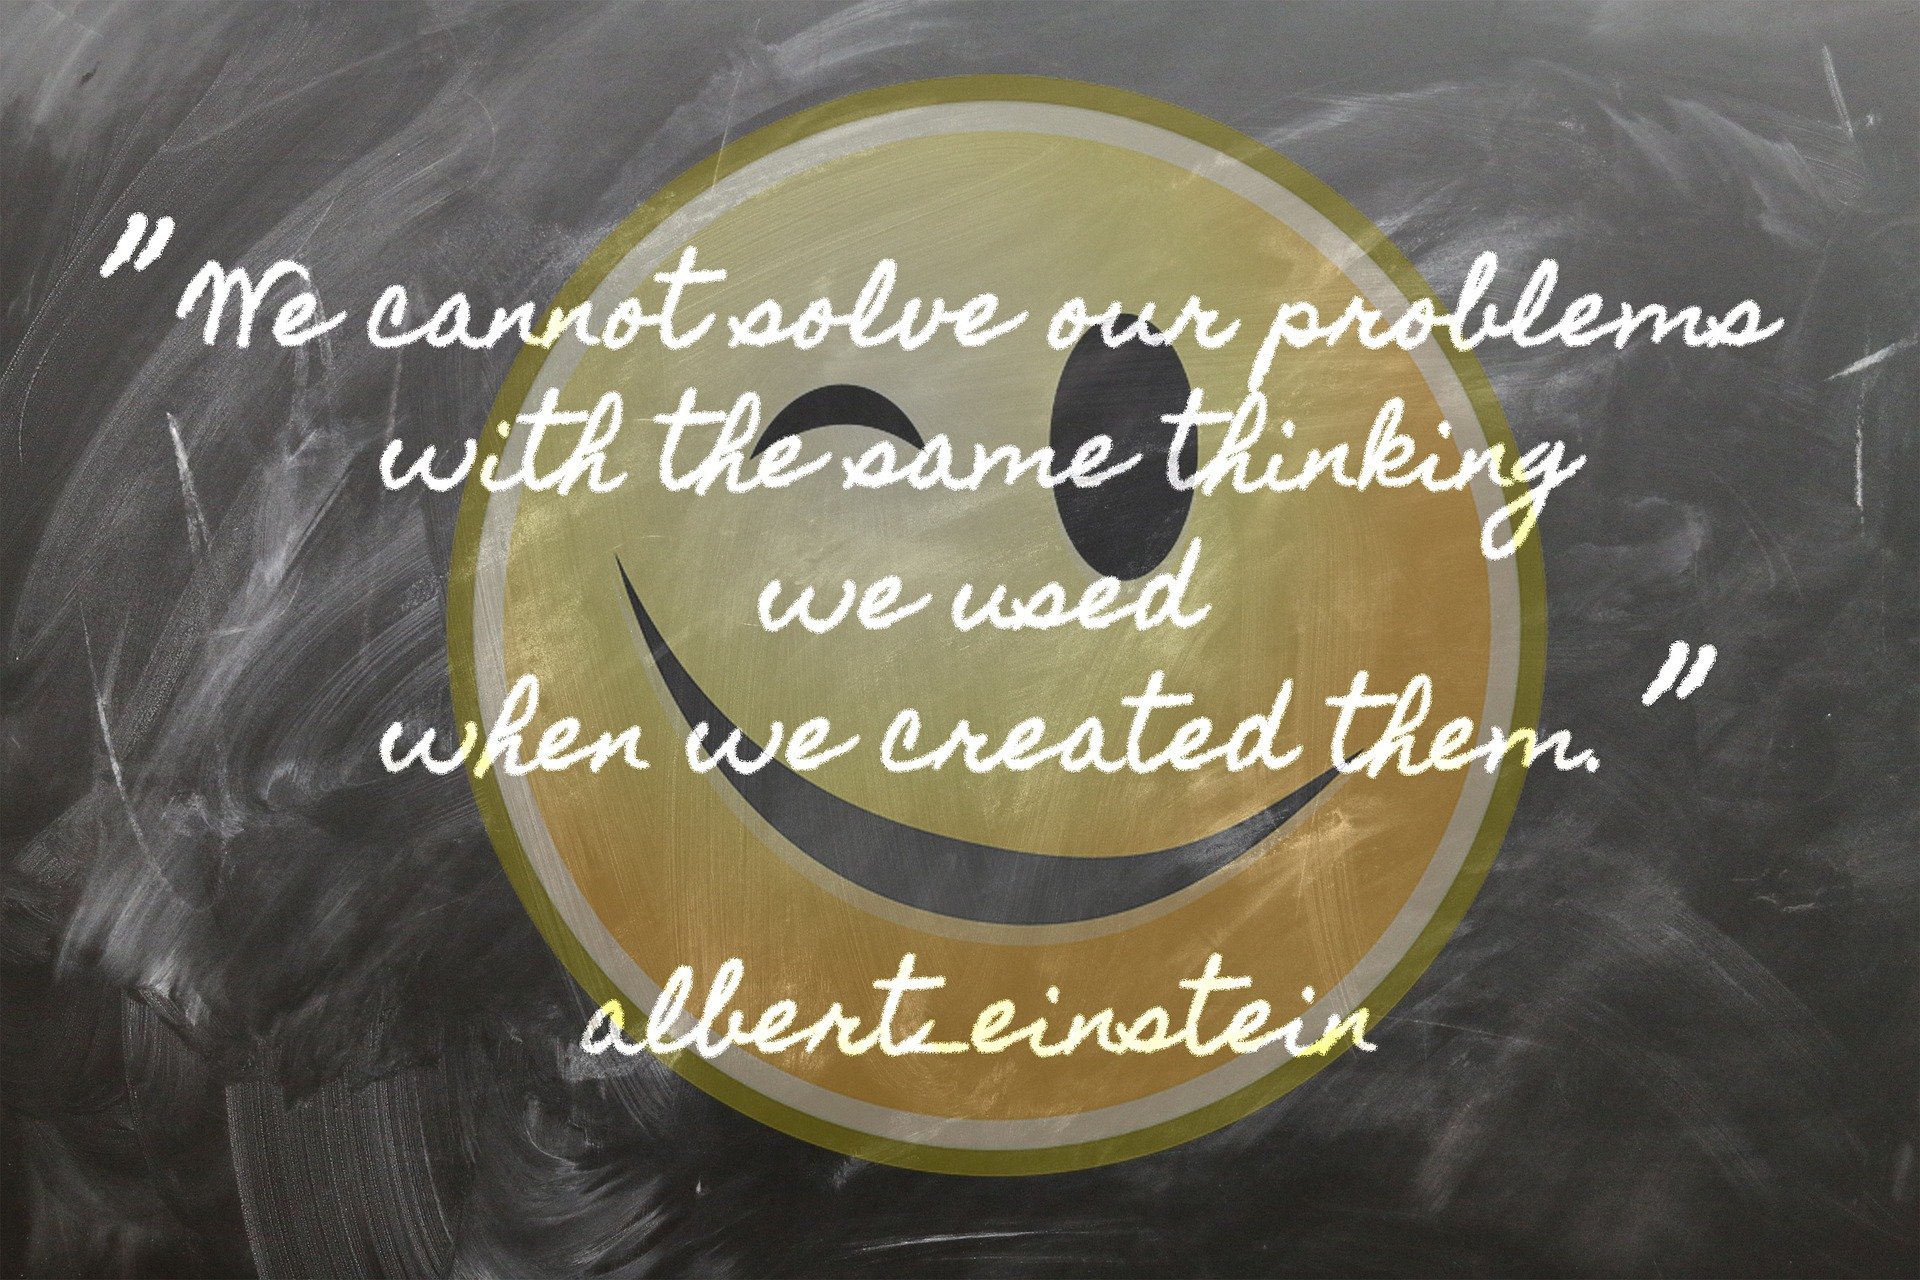 frase di einstein you cannot solve our problems with the same thinking we used when we created them